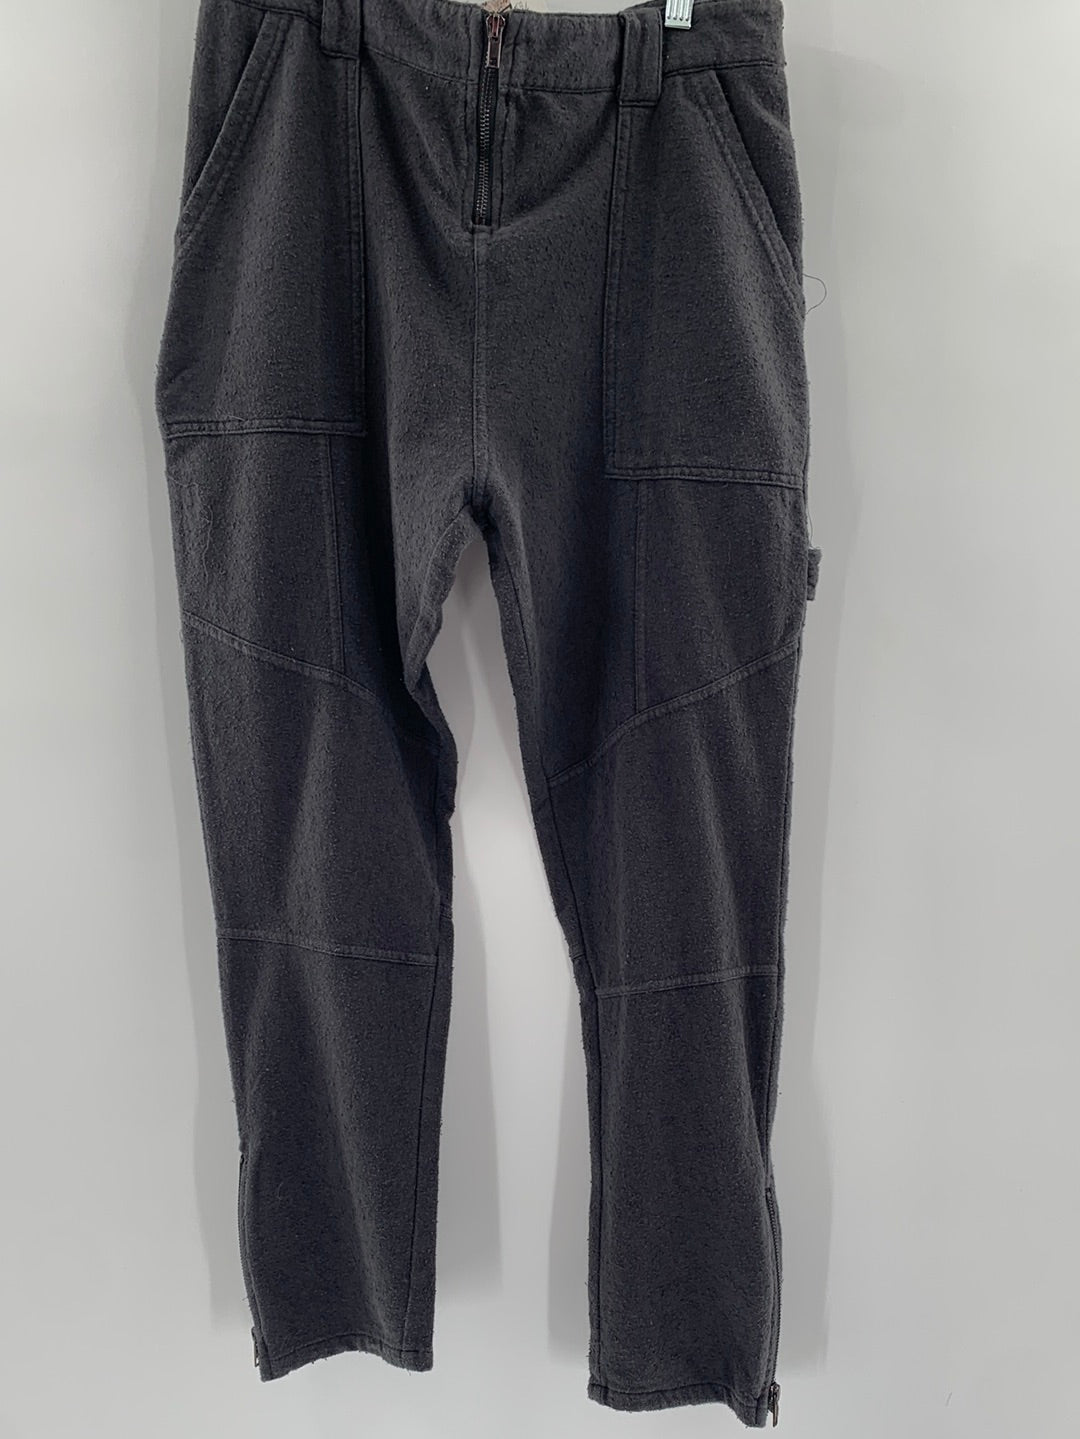 BDG Urban Outfitters Cargo Sweats (Size 4) – The Thrifty Hippy